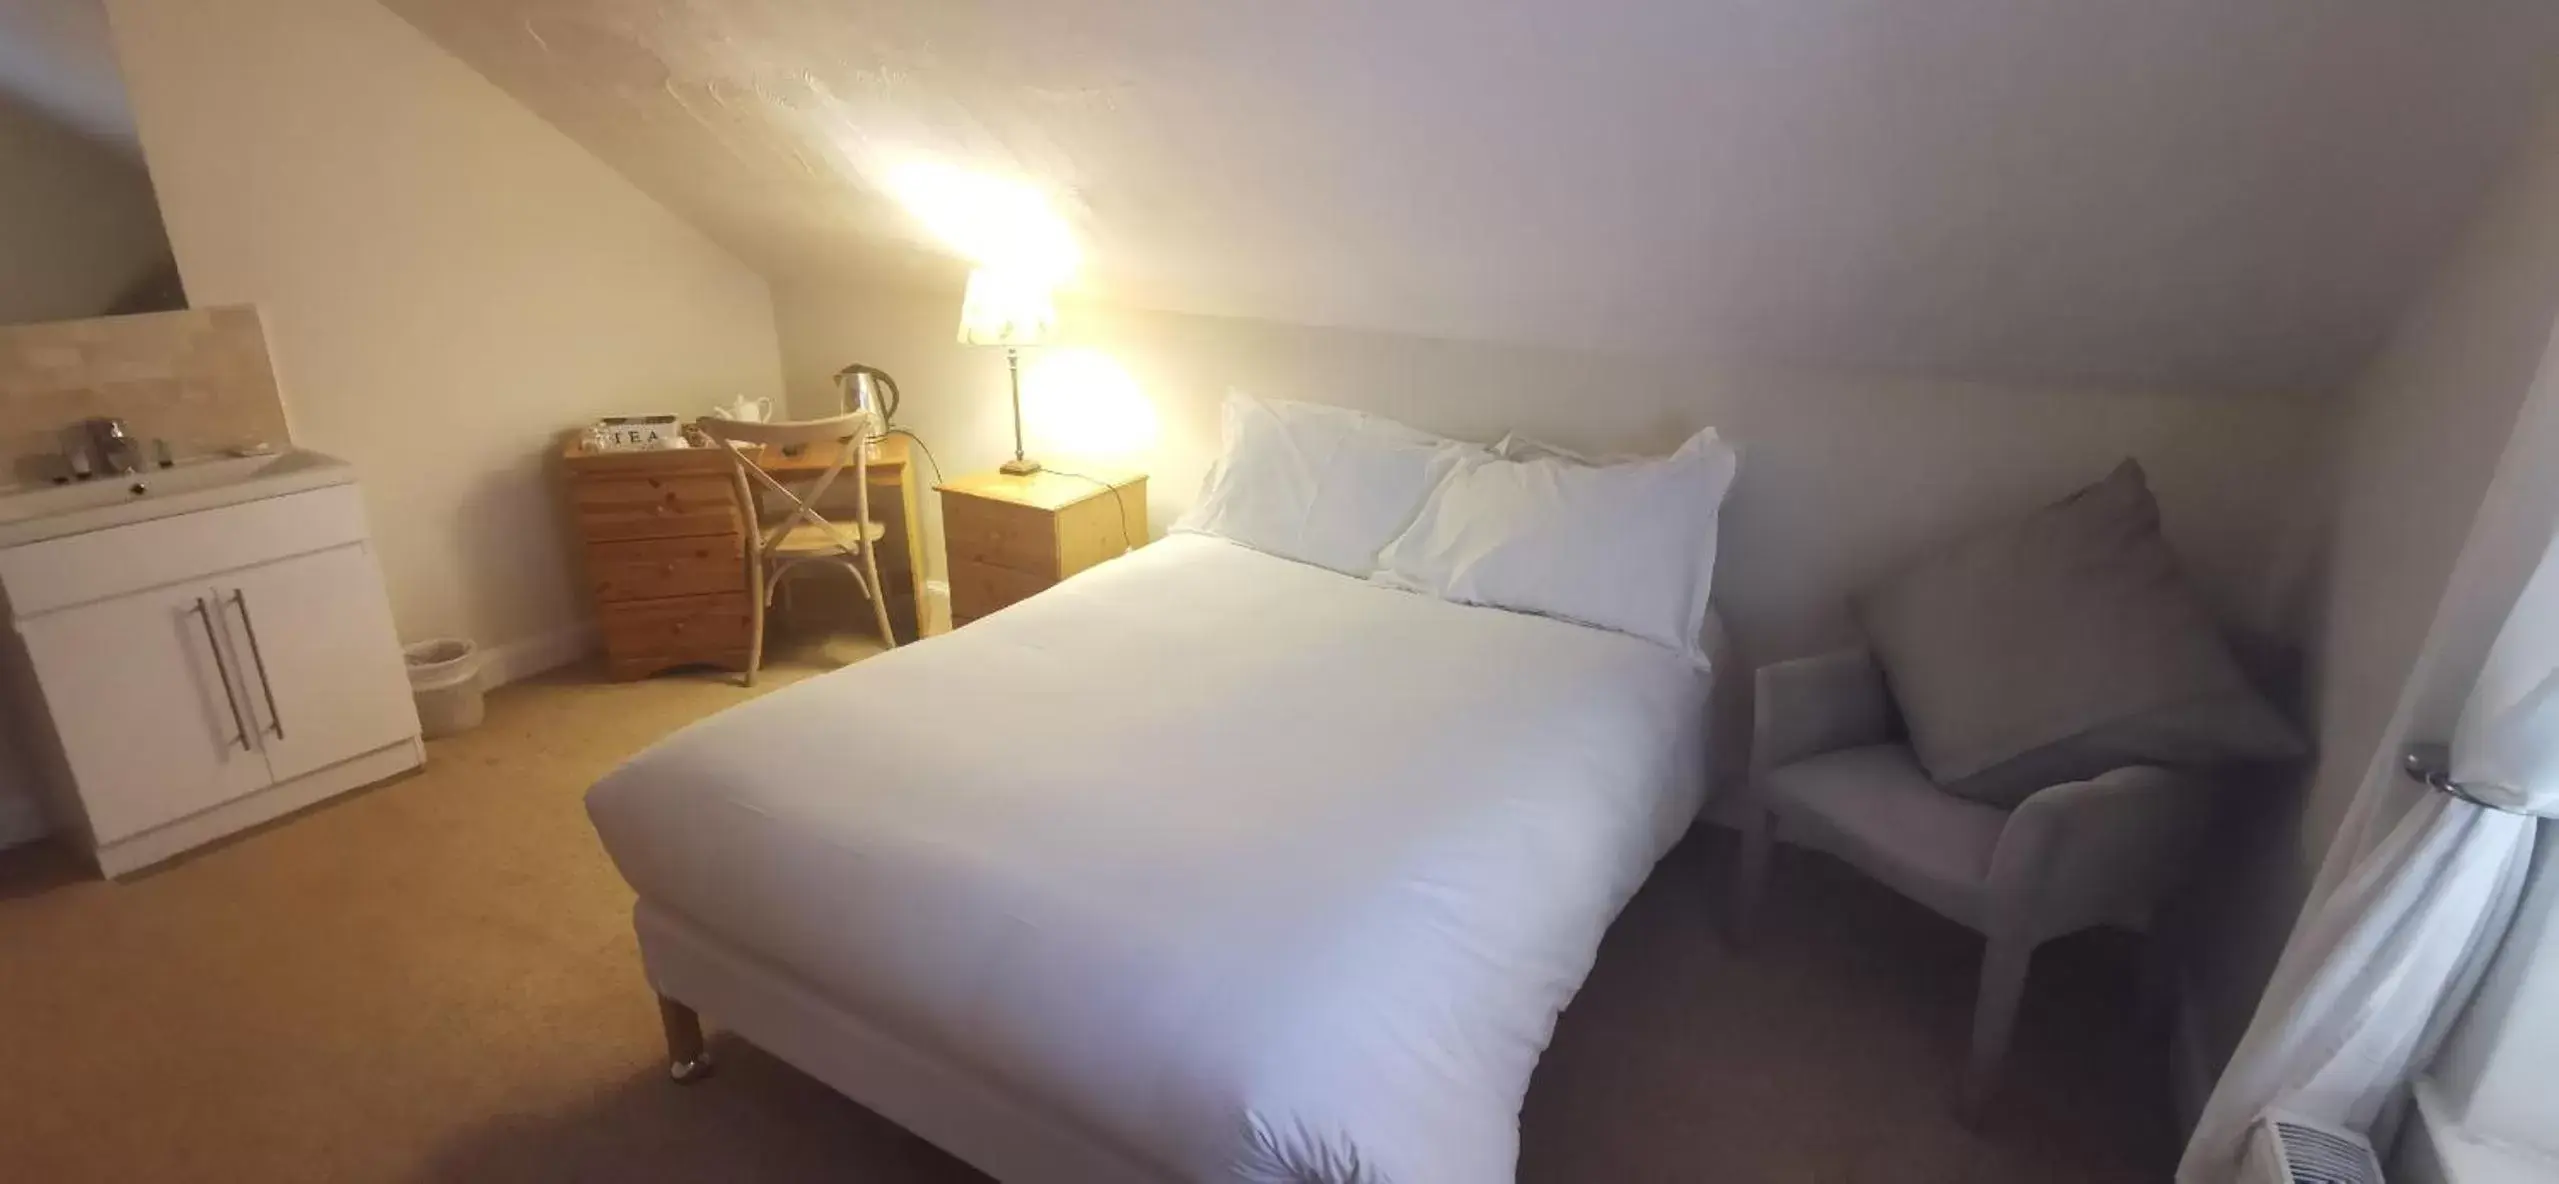 Budget Double Room in Buccleuch and Queensberry Arms Hotel